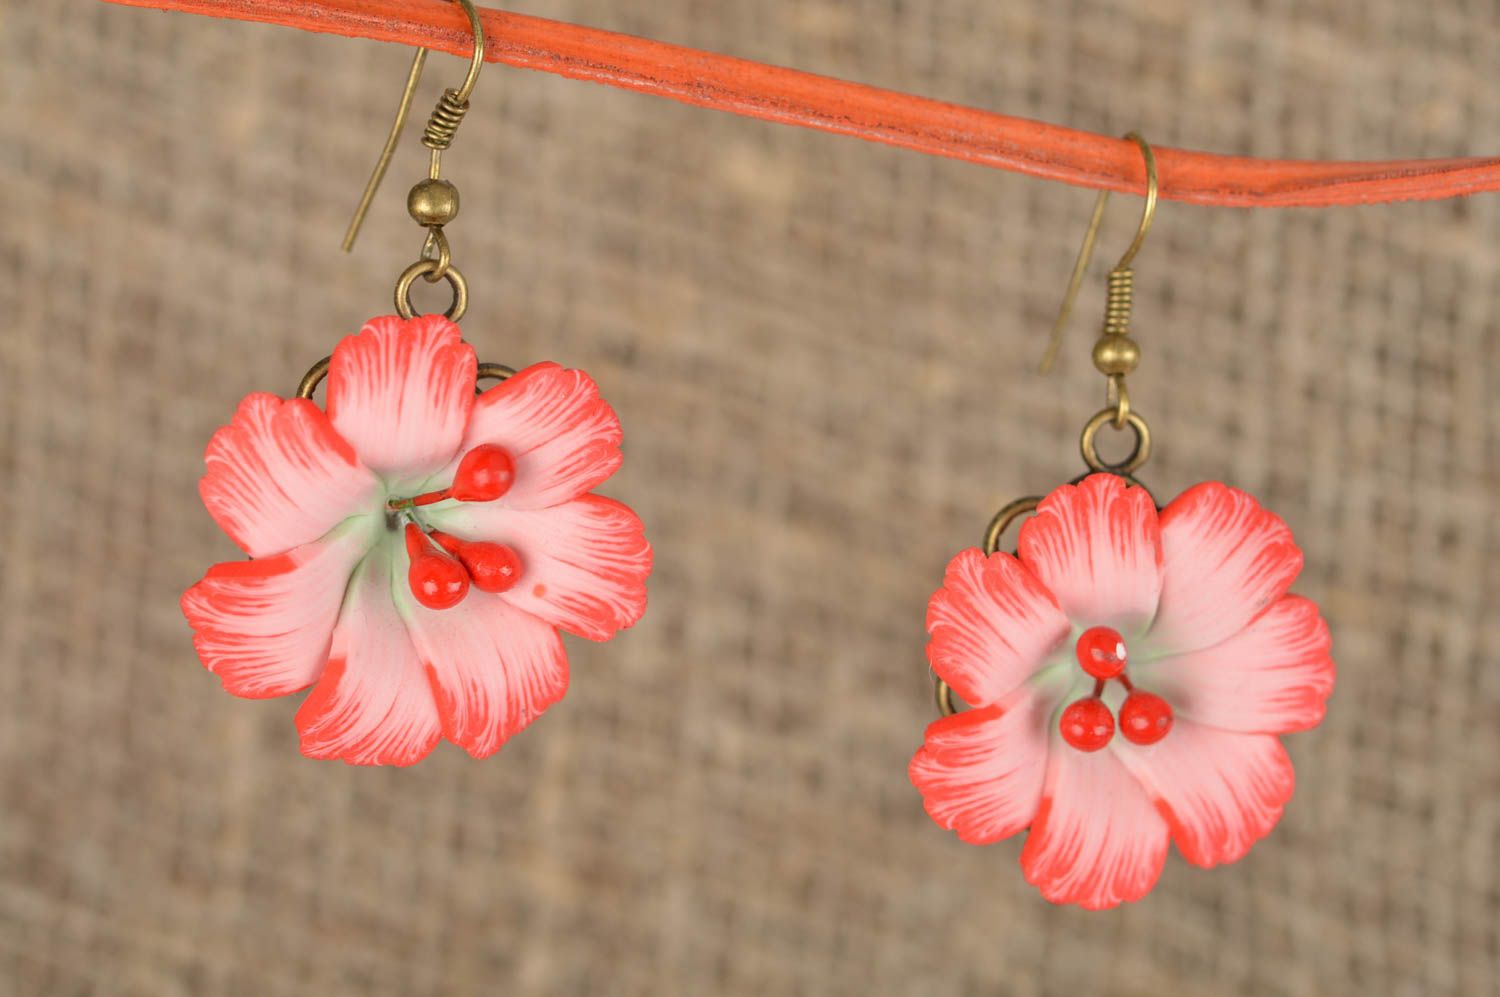 Cute small earrings with flowers made of polymer clay for stylish looks photo 1